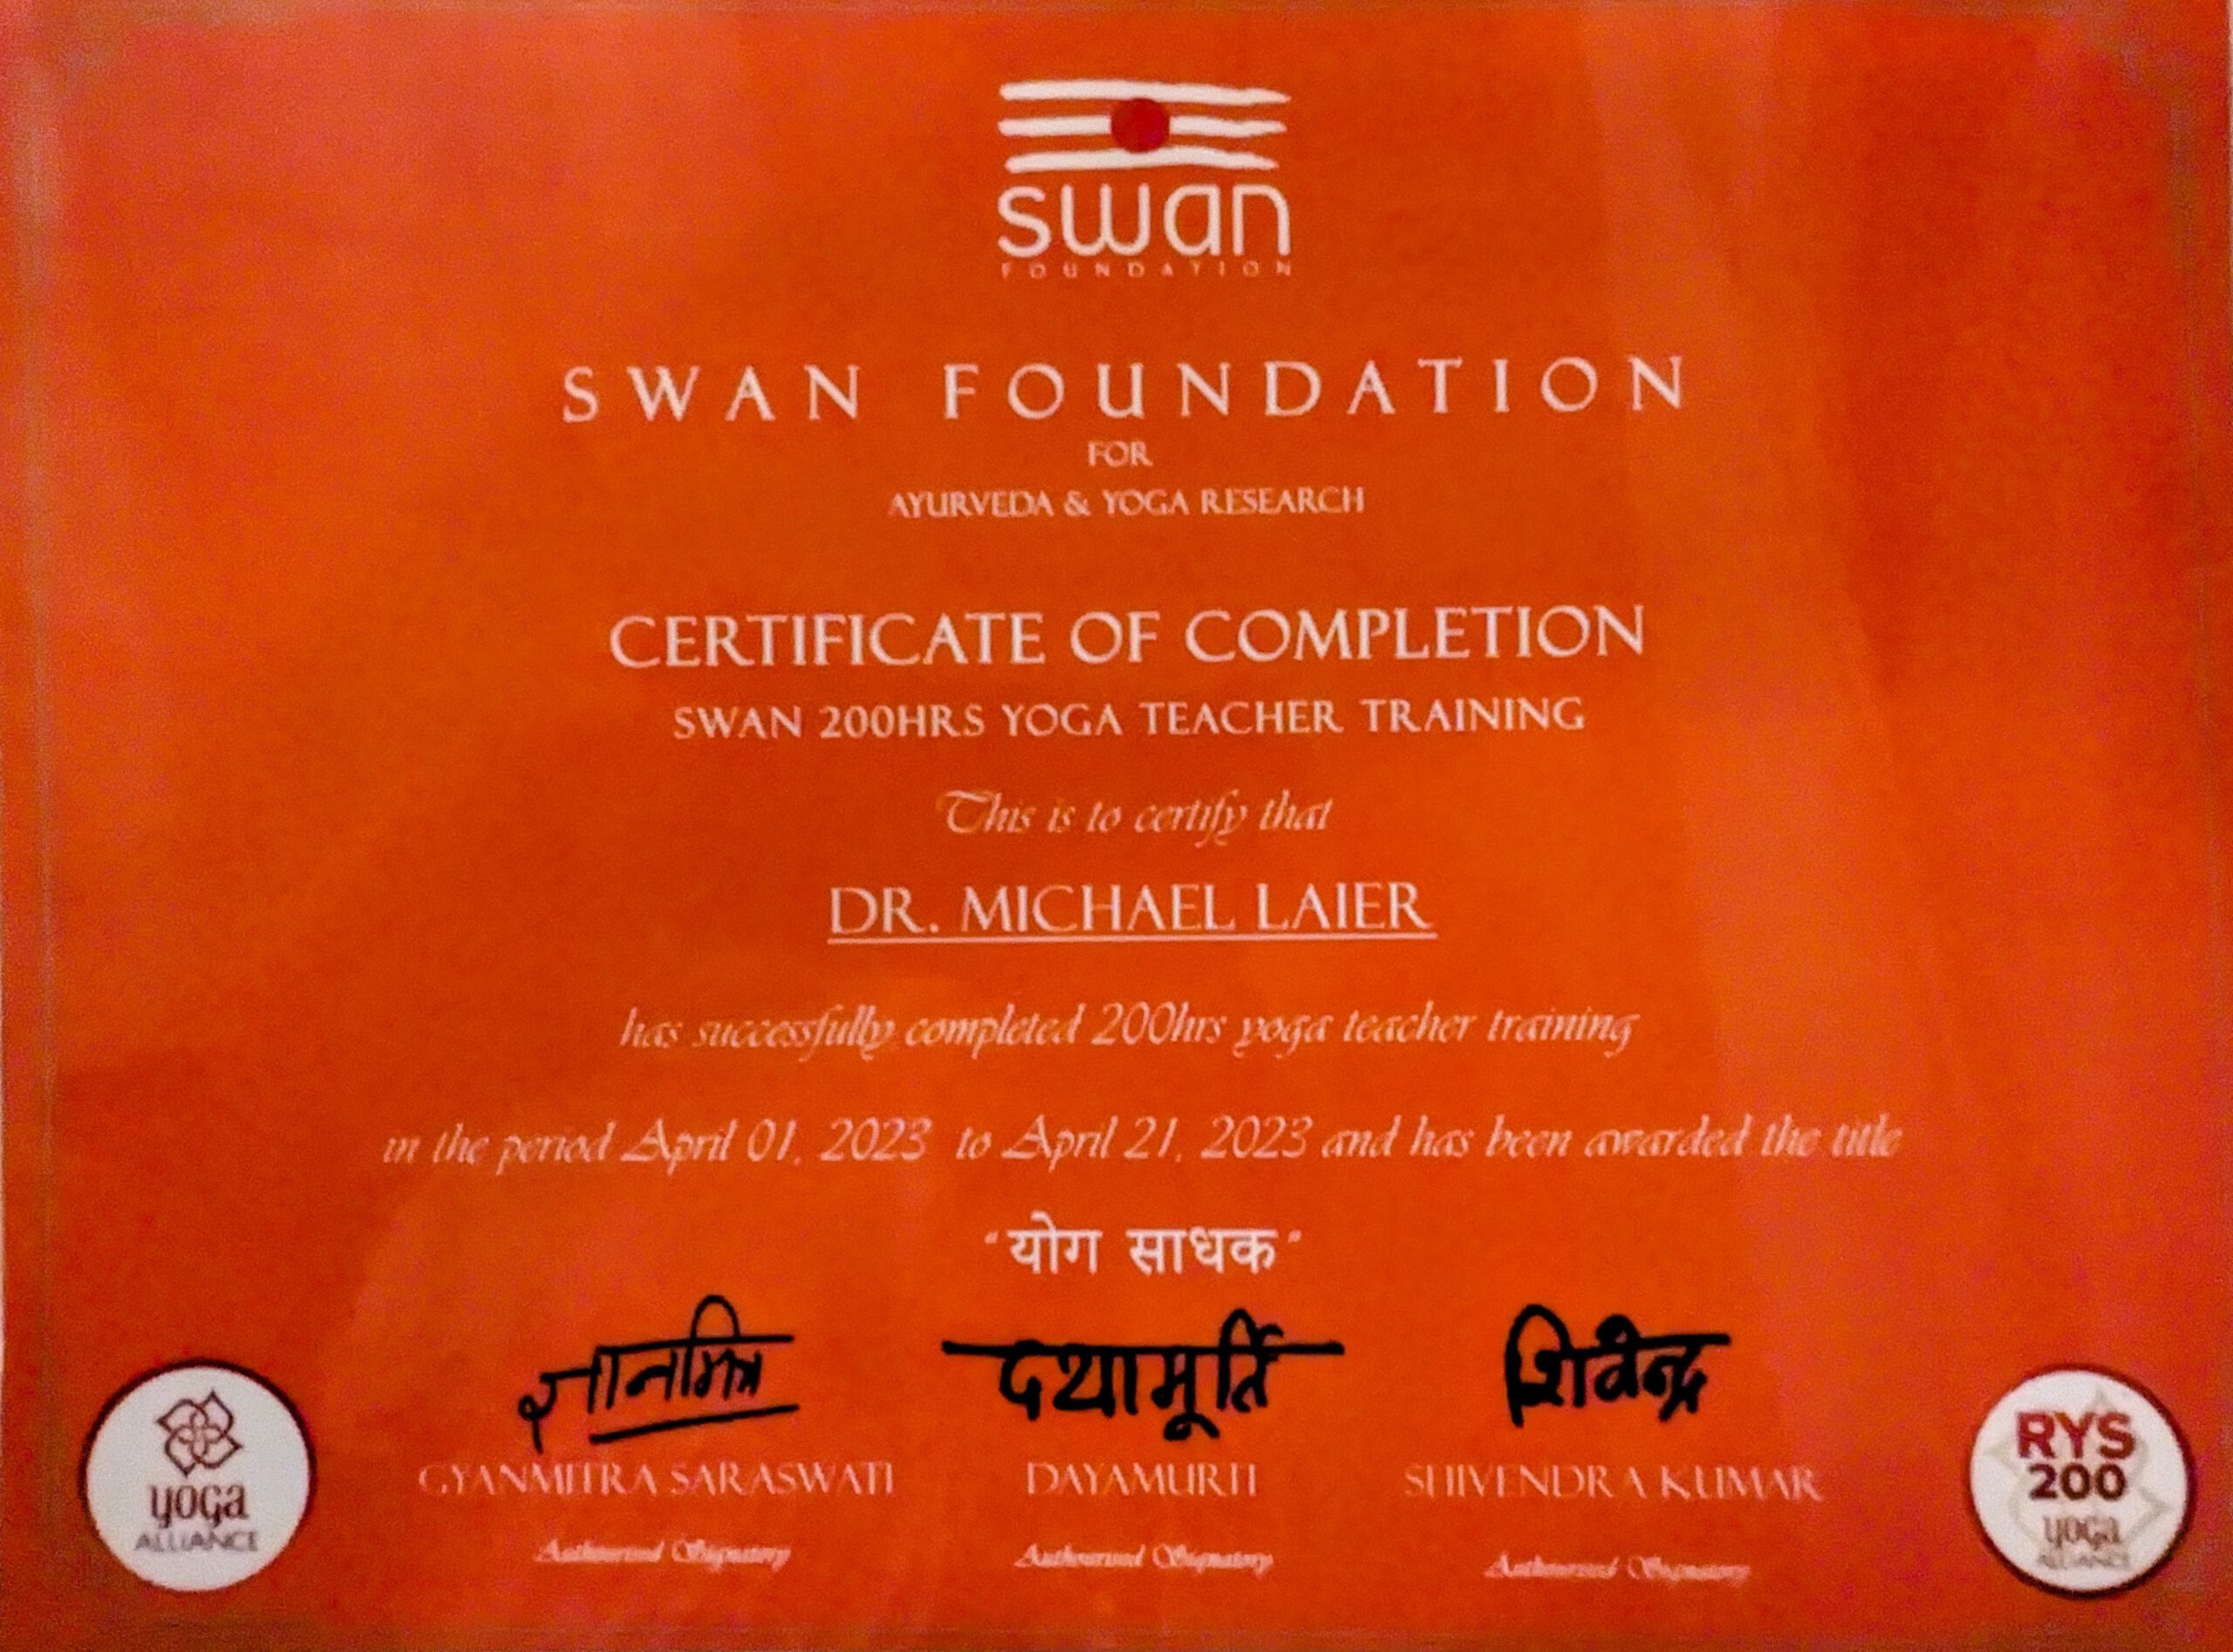 Swan Foundation Certificate of completion